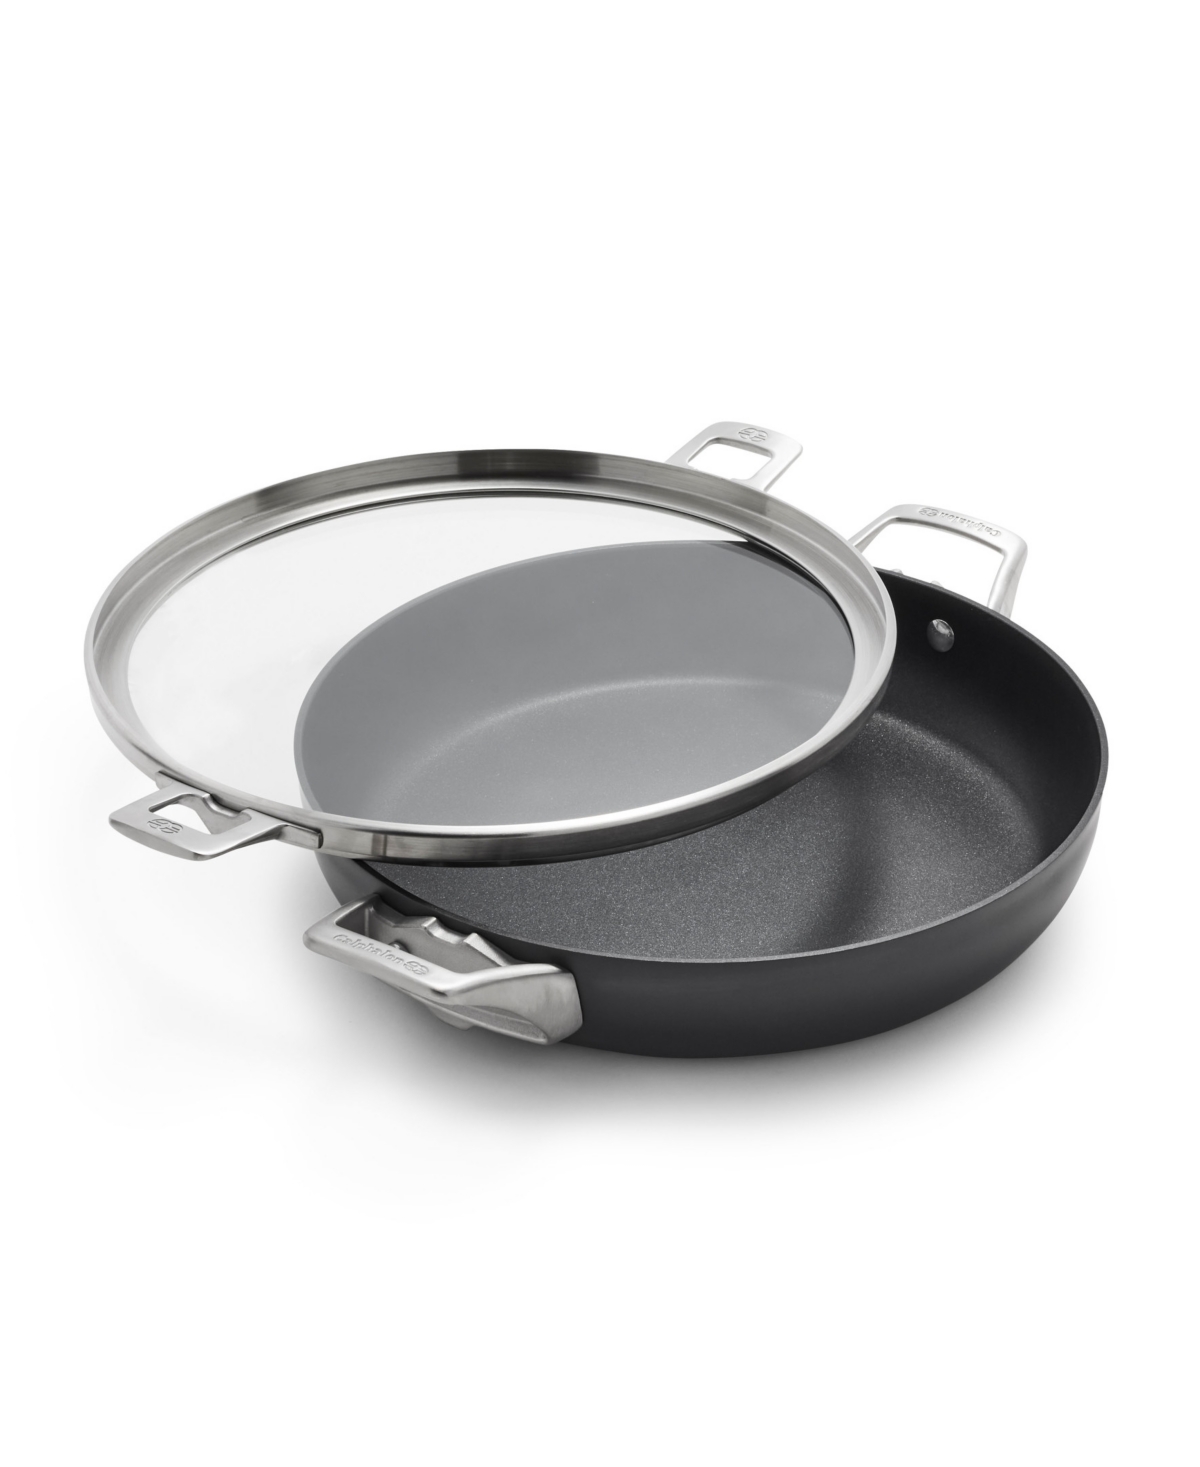 Calphalon Premier Space-saving Hard-anodized Aluminum Nonstick 12" Everyday Pan With Lid In Black,stainless Steel